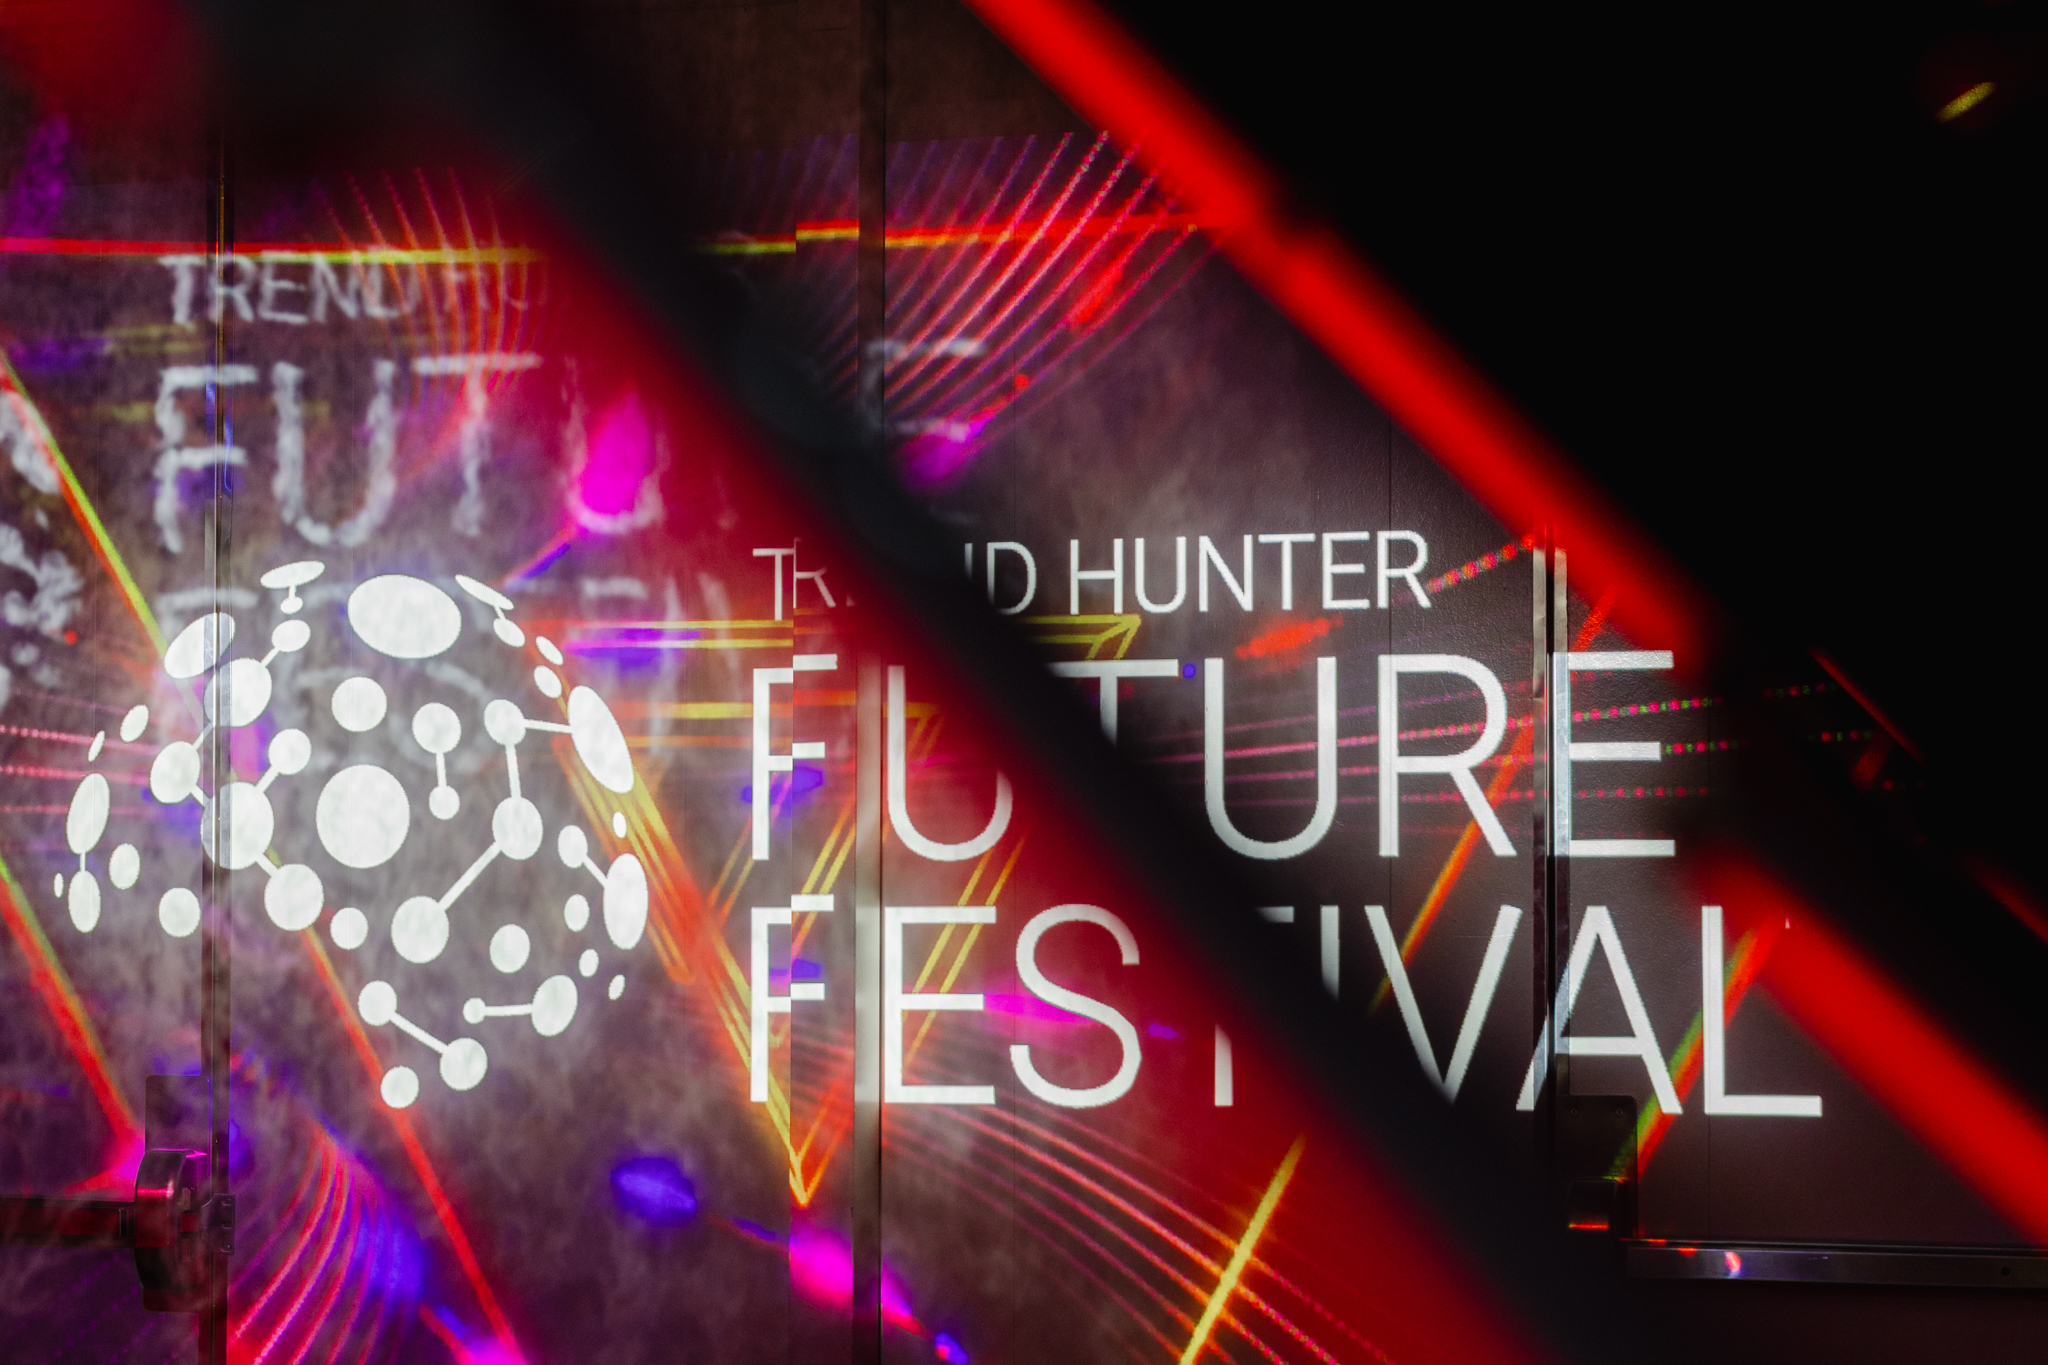 A neon sign advertising an exciting event, the Future Festival, perfect for capturing memorable moments with event photography.